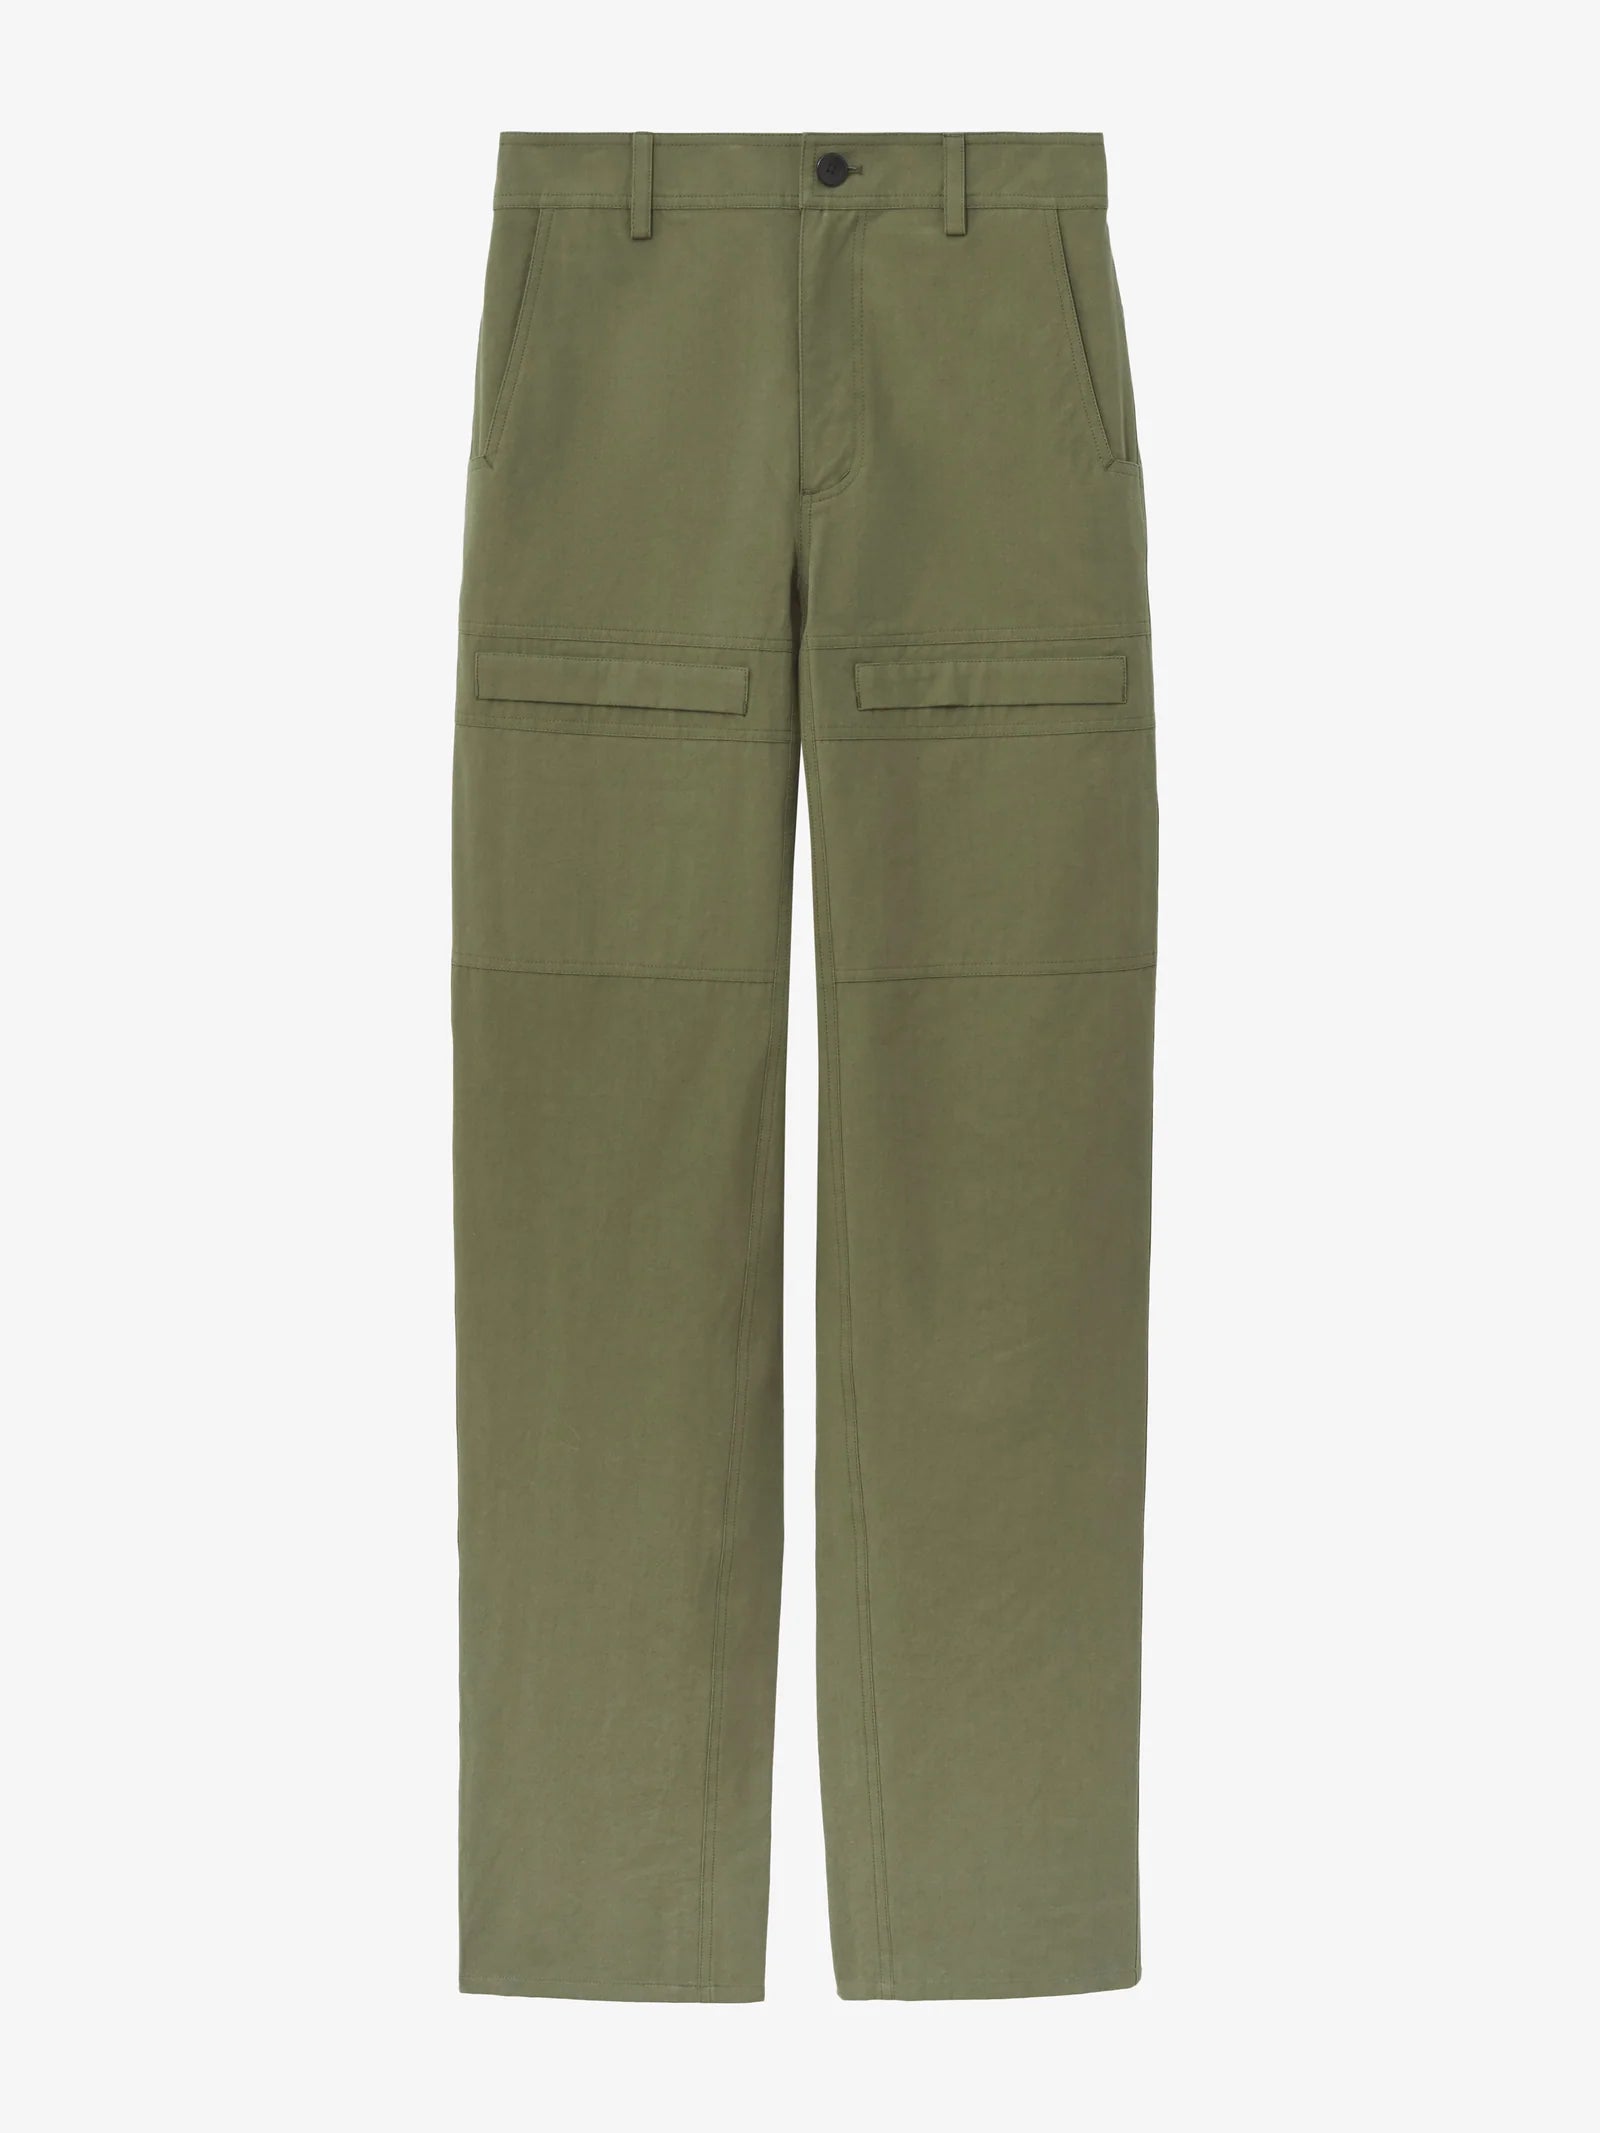 Sydnor Pants in Rumpled Cotton